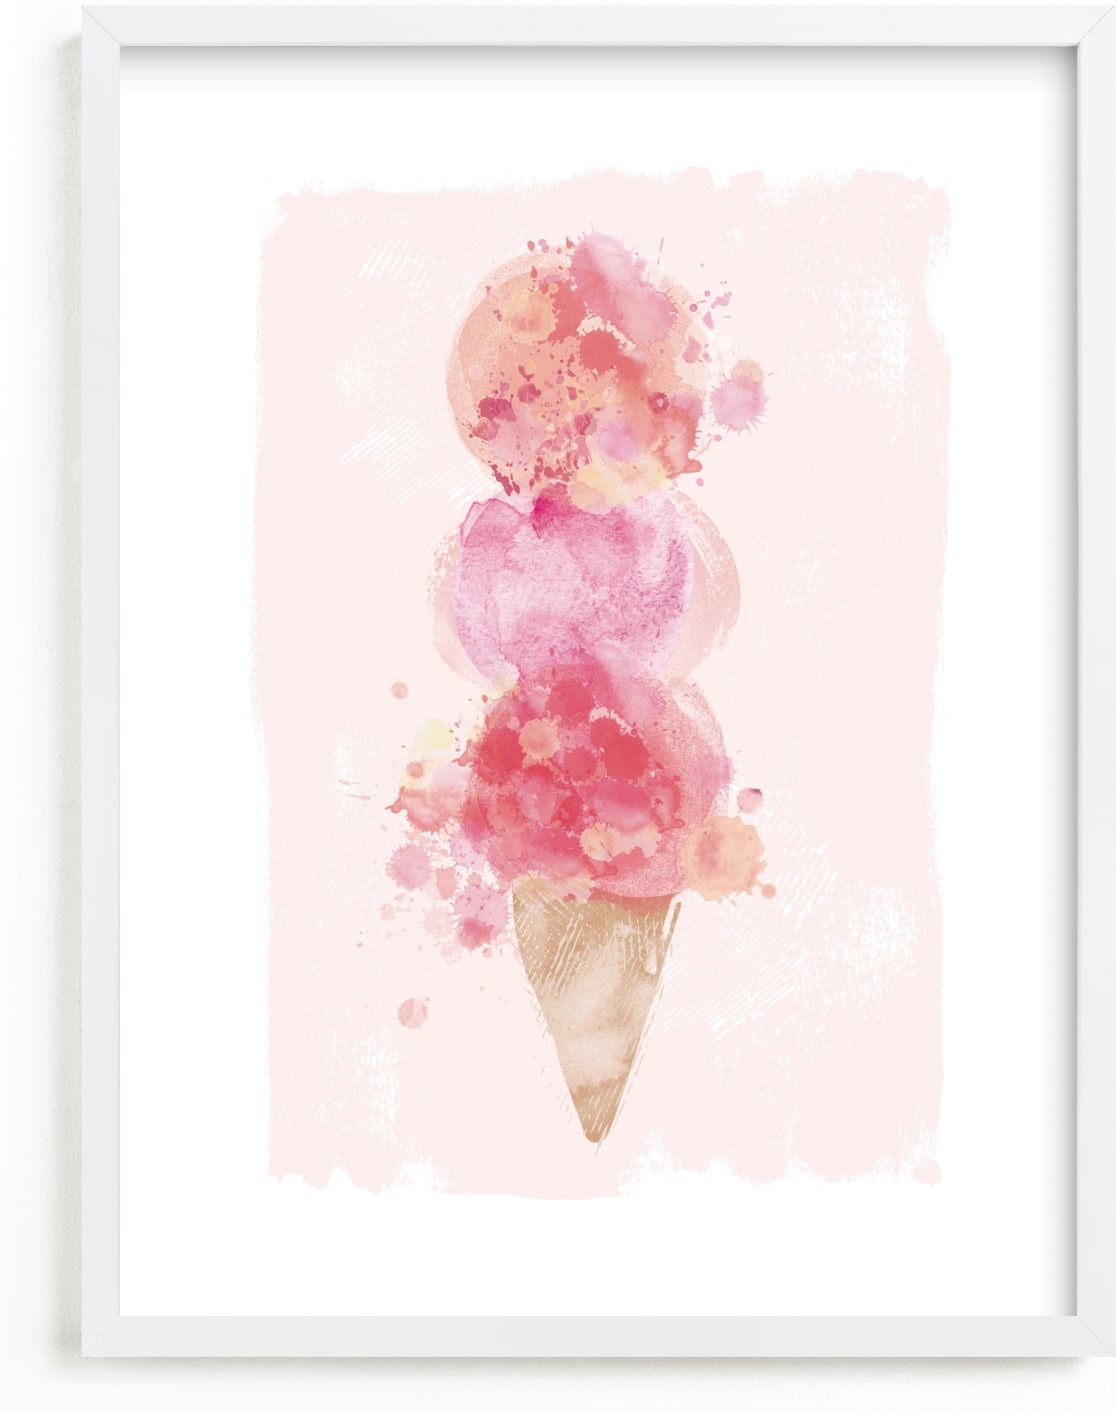 This is a pink kids wall art by silverscreen studio called mermaid scoops.